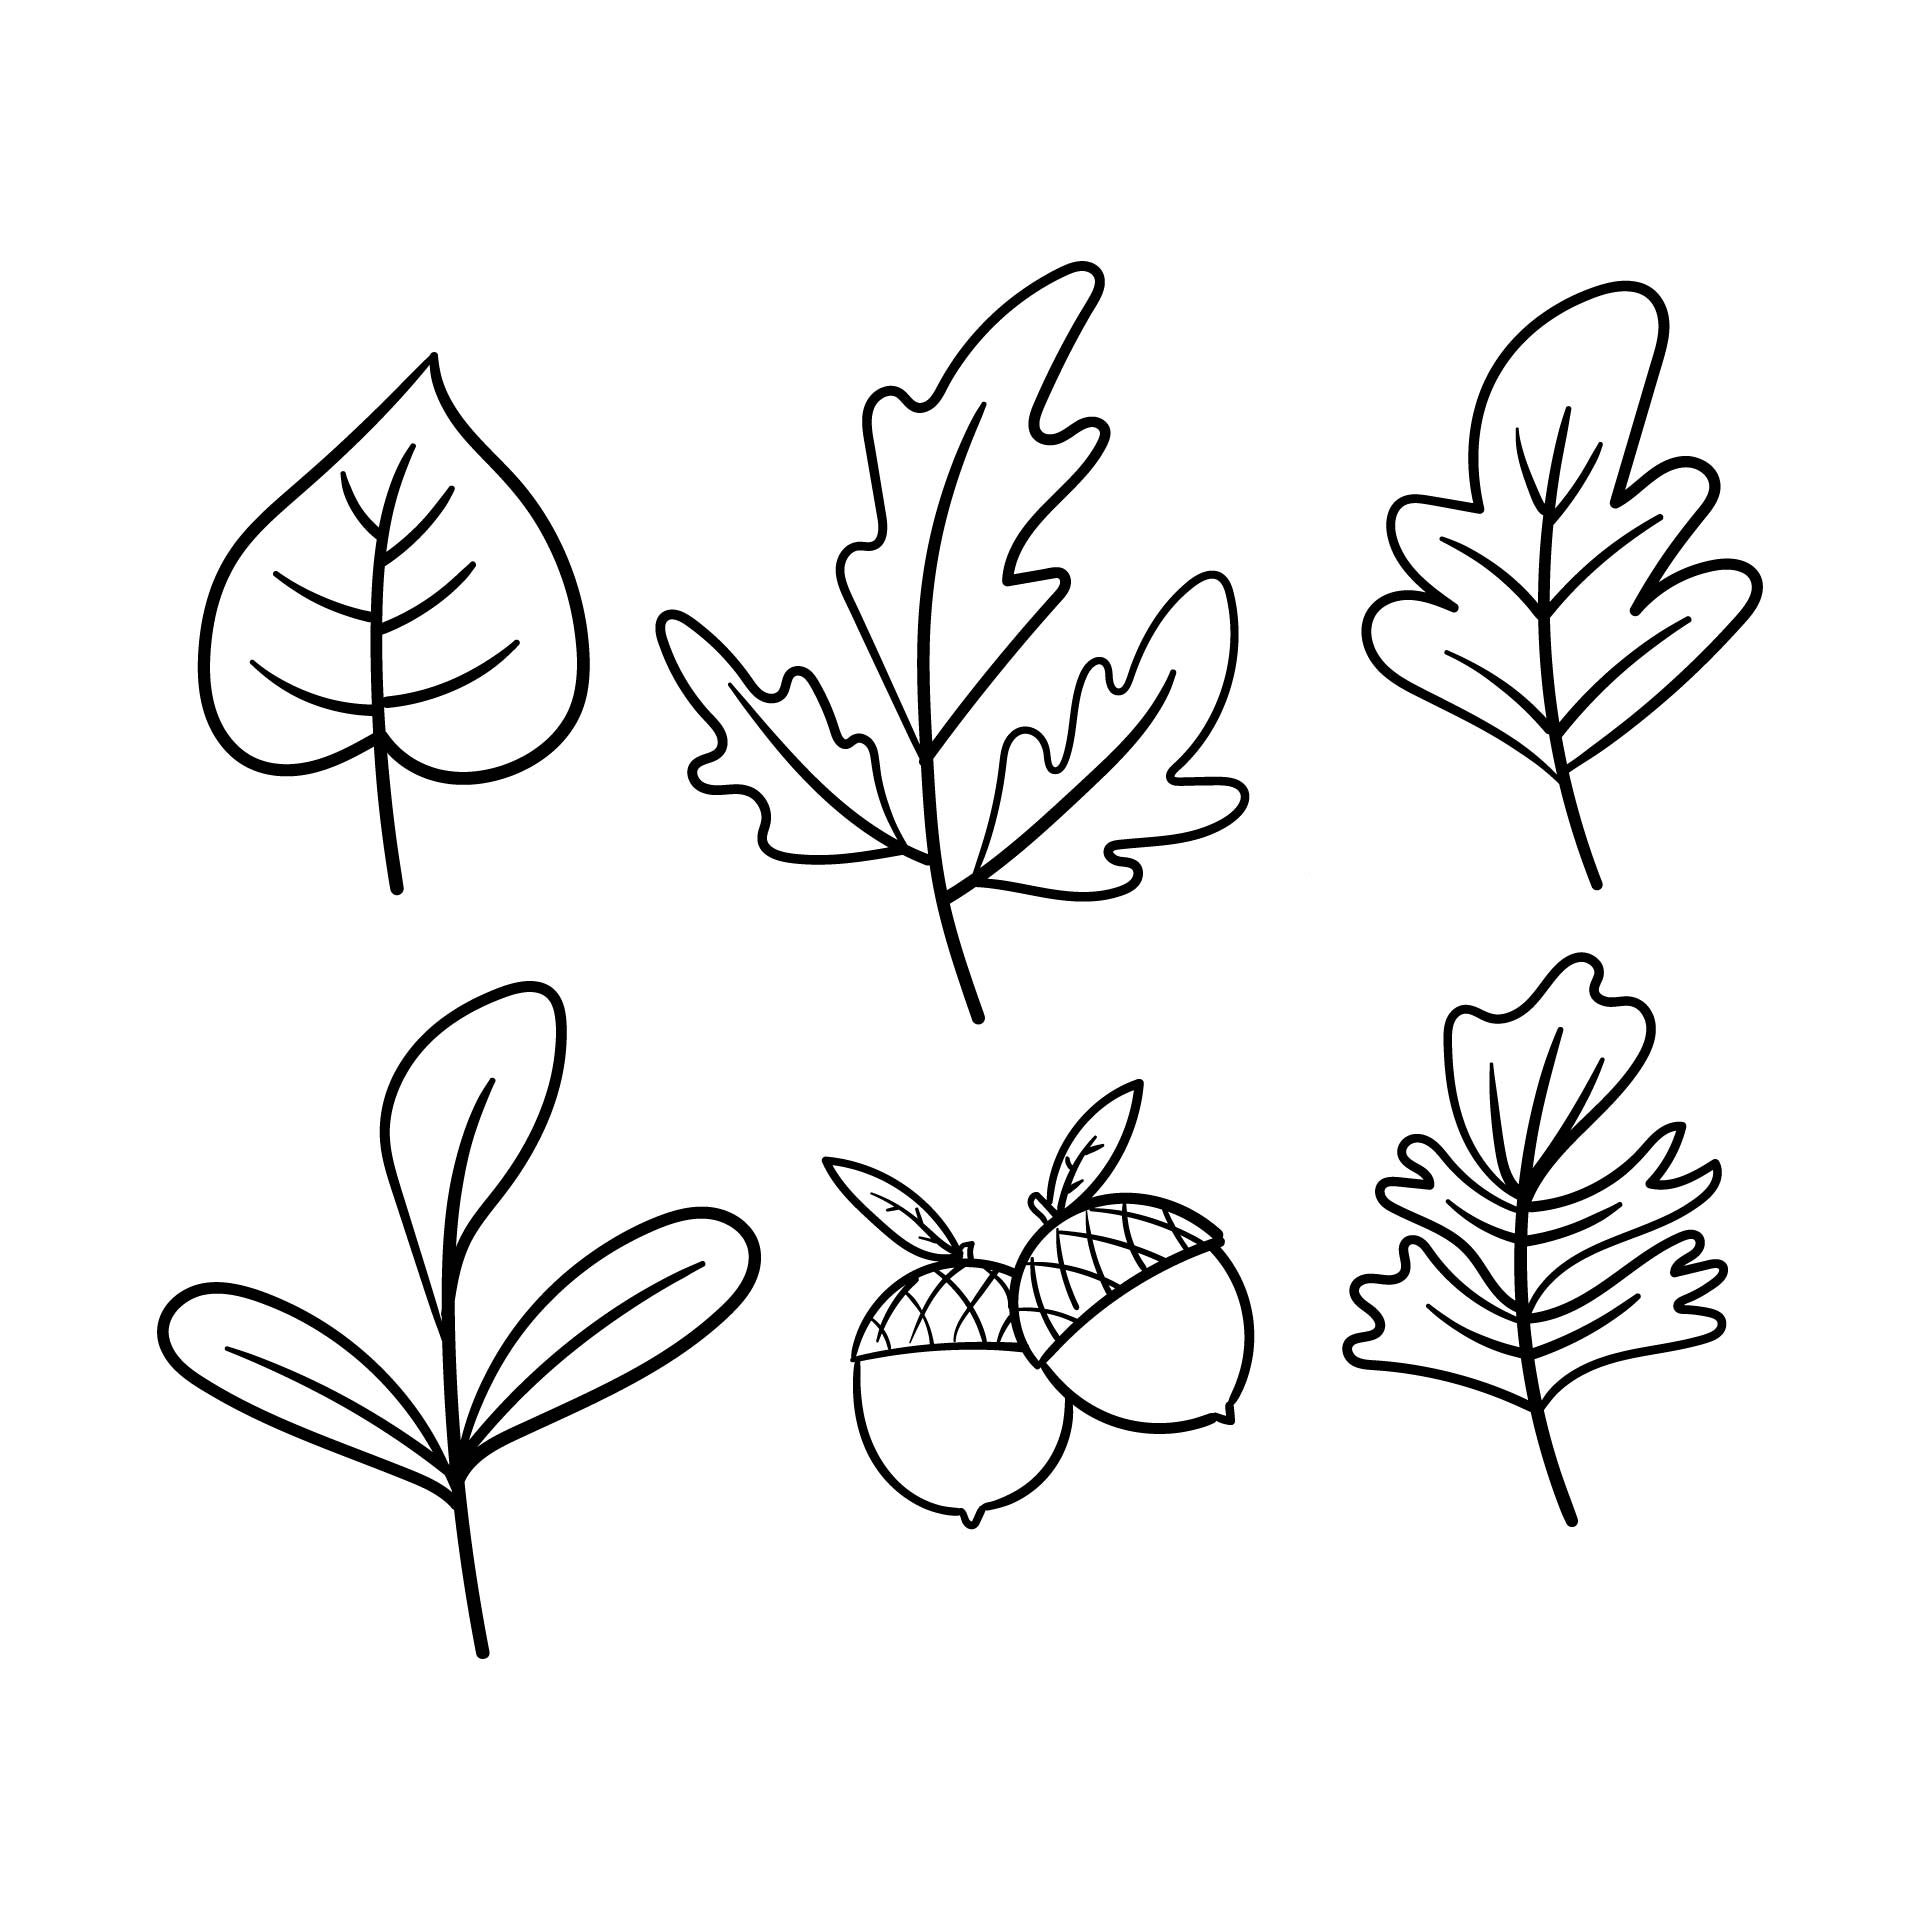 Printable Autumn Leaves Coloring Pages